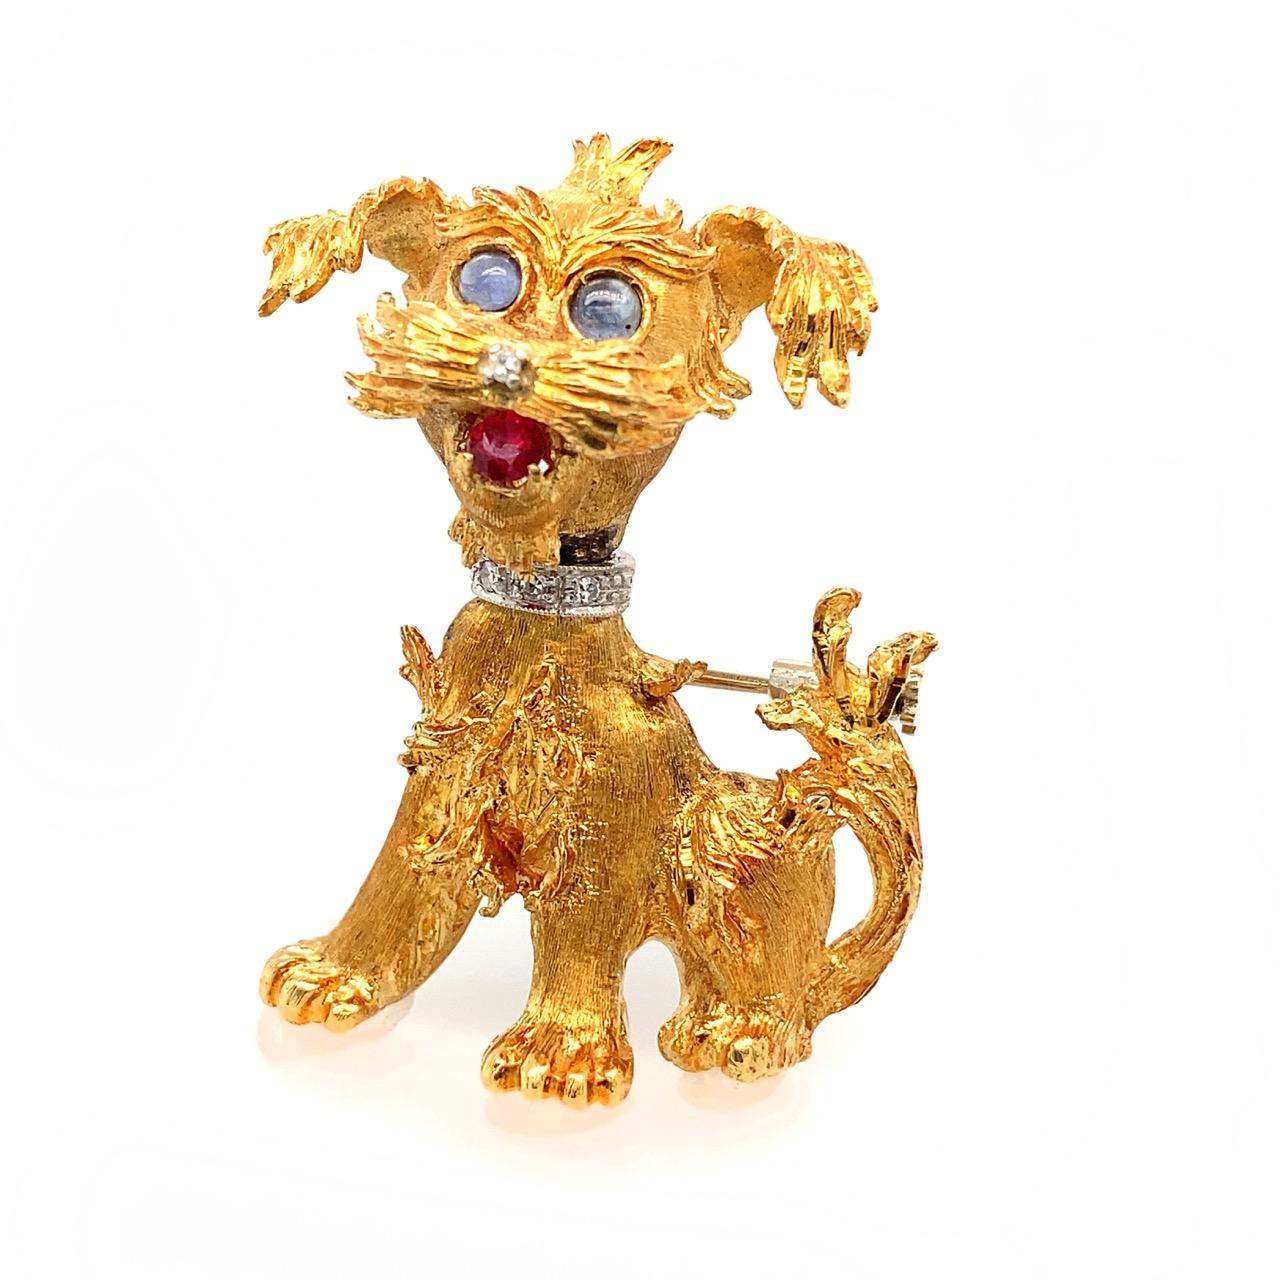 A delightful and finely executed 18k/14K gold brooch of a Schnauzer dog with a diamond nose and collar, sweet sapphire cabochon eyes and a ruby tongue.
The pin and collar are in white gold.

The head of the dog has a surprising movement mechanism,